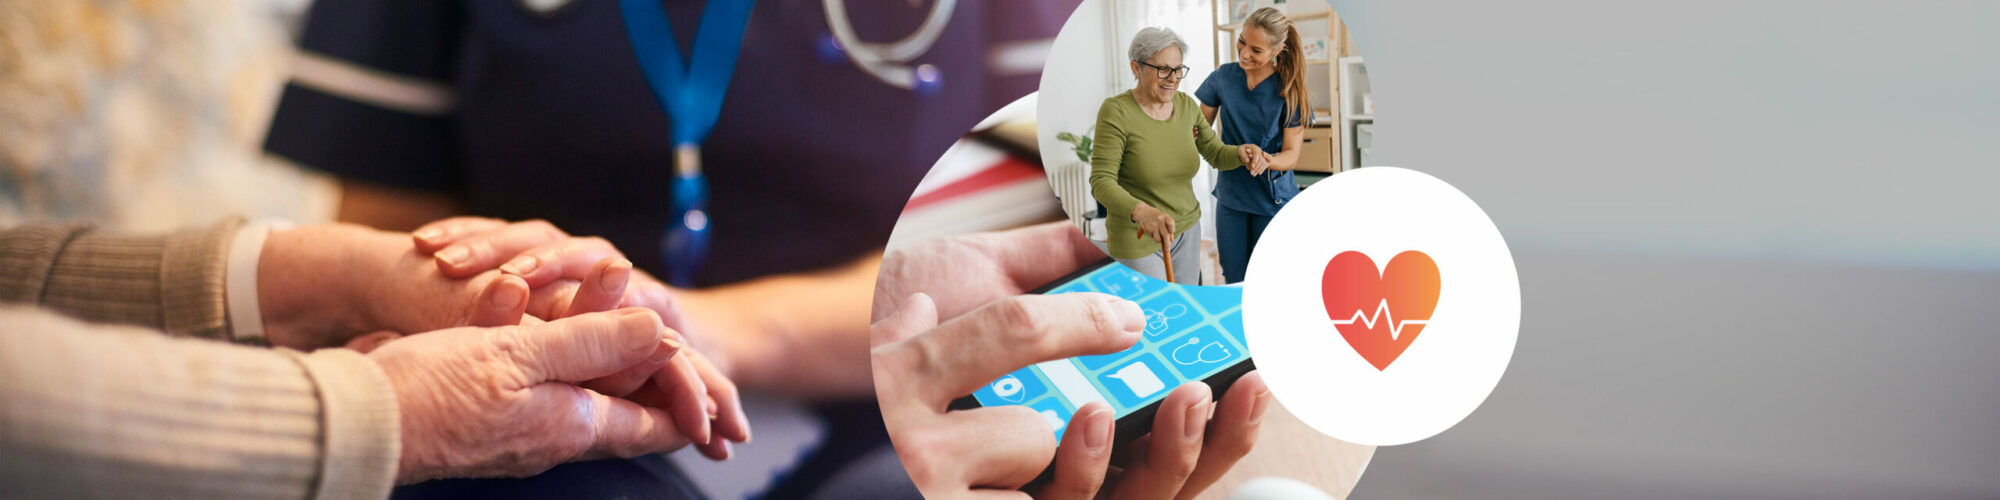 Picture of a female caregiver assisting an elderly patient with walking at home, next to a heart icon and a person using a digital healthcare app